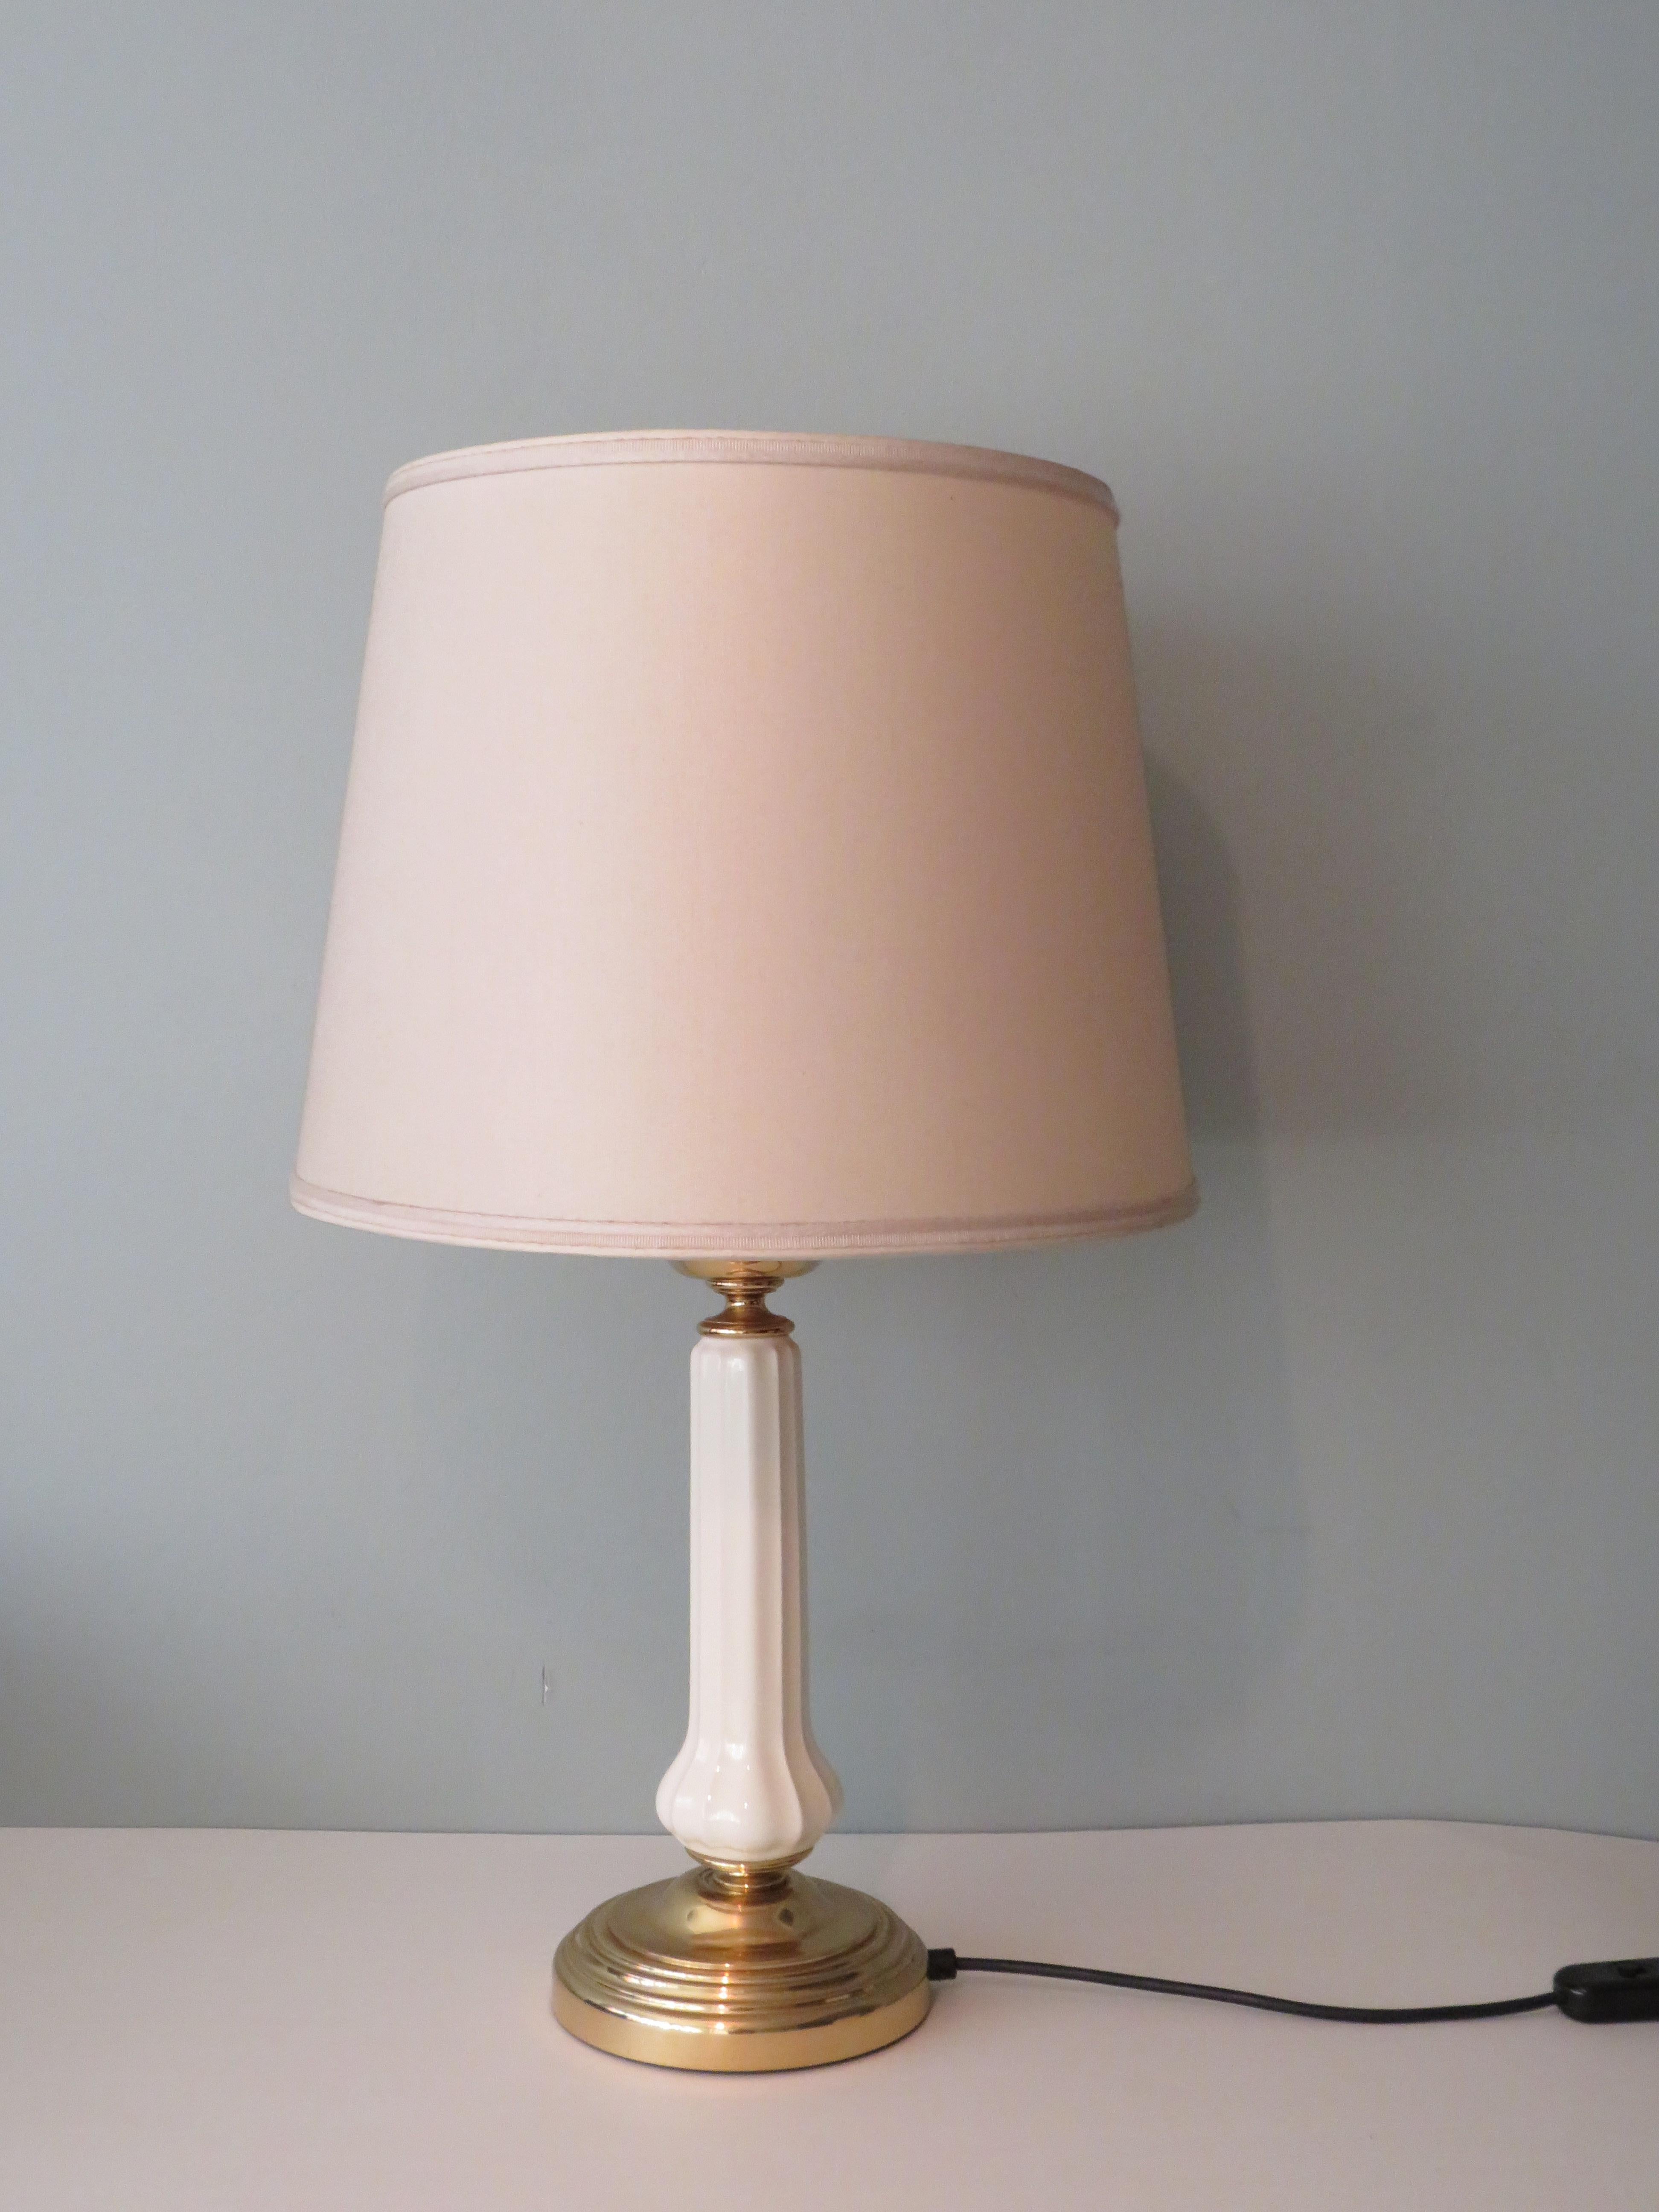 Mid-Century Modern Mid Century Brass and Ceramic Table Lamp, Belgium 1960s For Sale